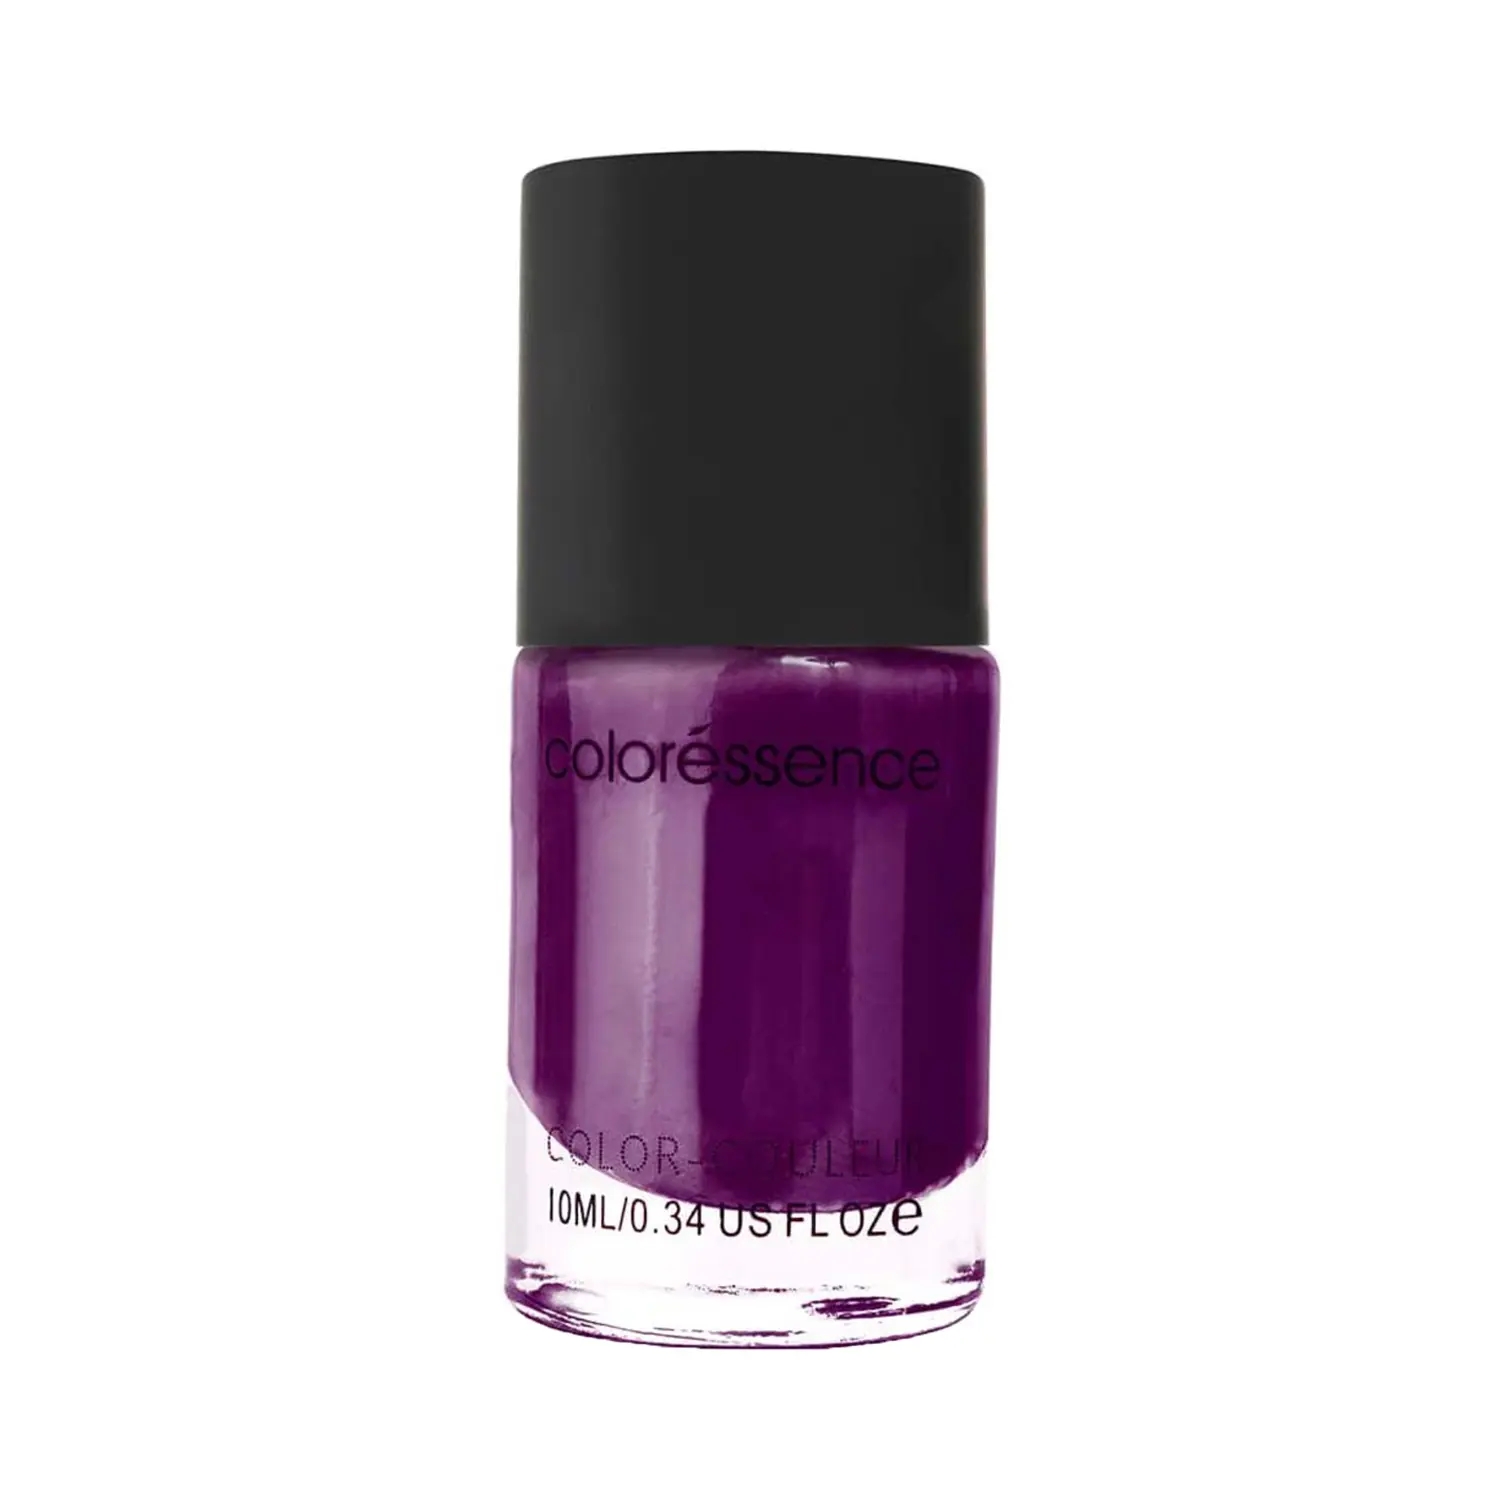 Coloressence | Coloressence Regular Nail Paint - Theme For Dream (10ml)